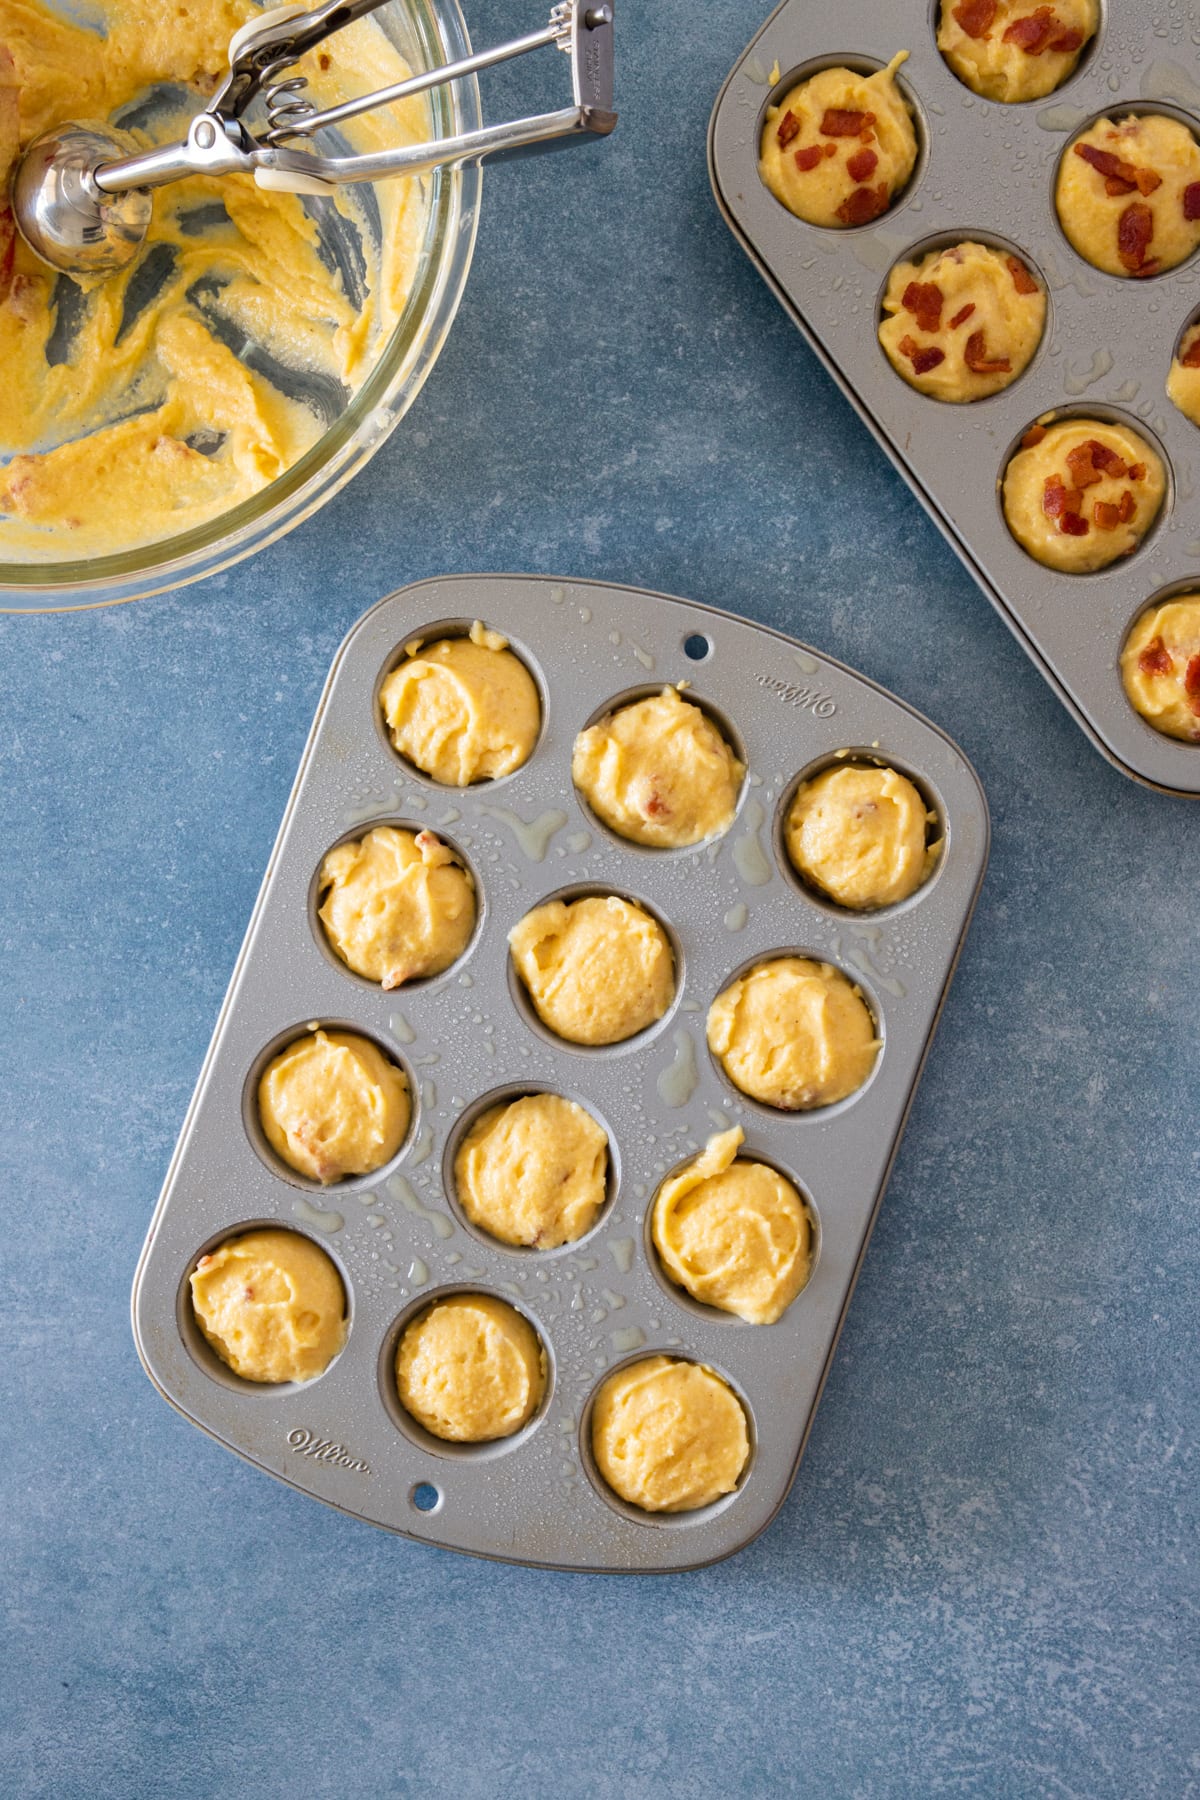 uncooked batter in mini muffins baking pan